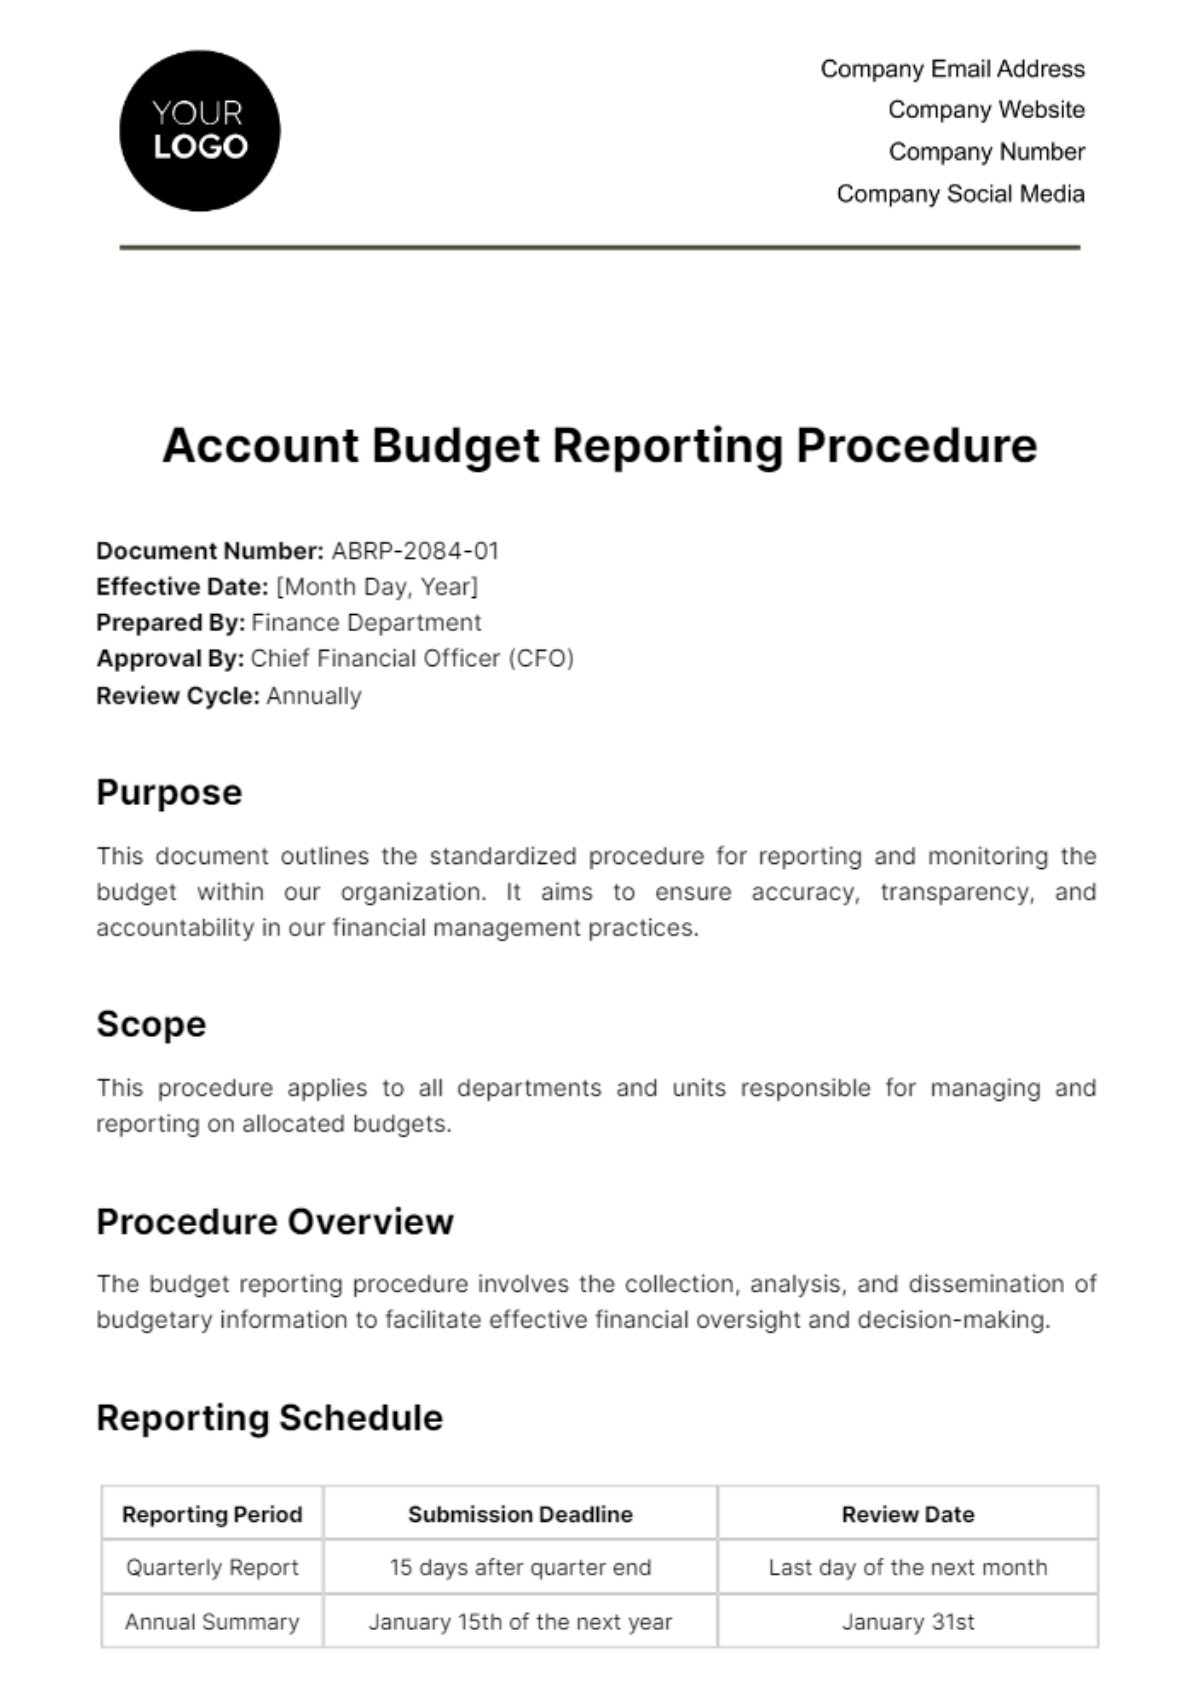 Free Account Budget Reporting Procedure Template